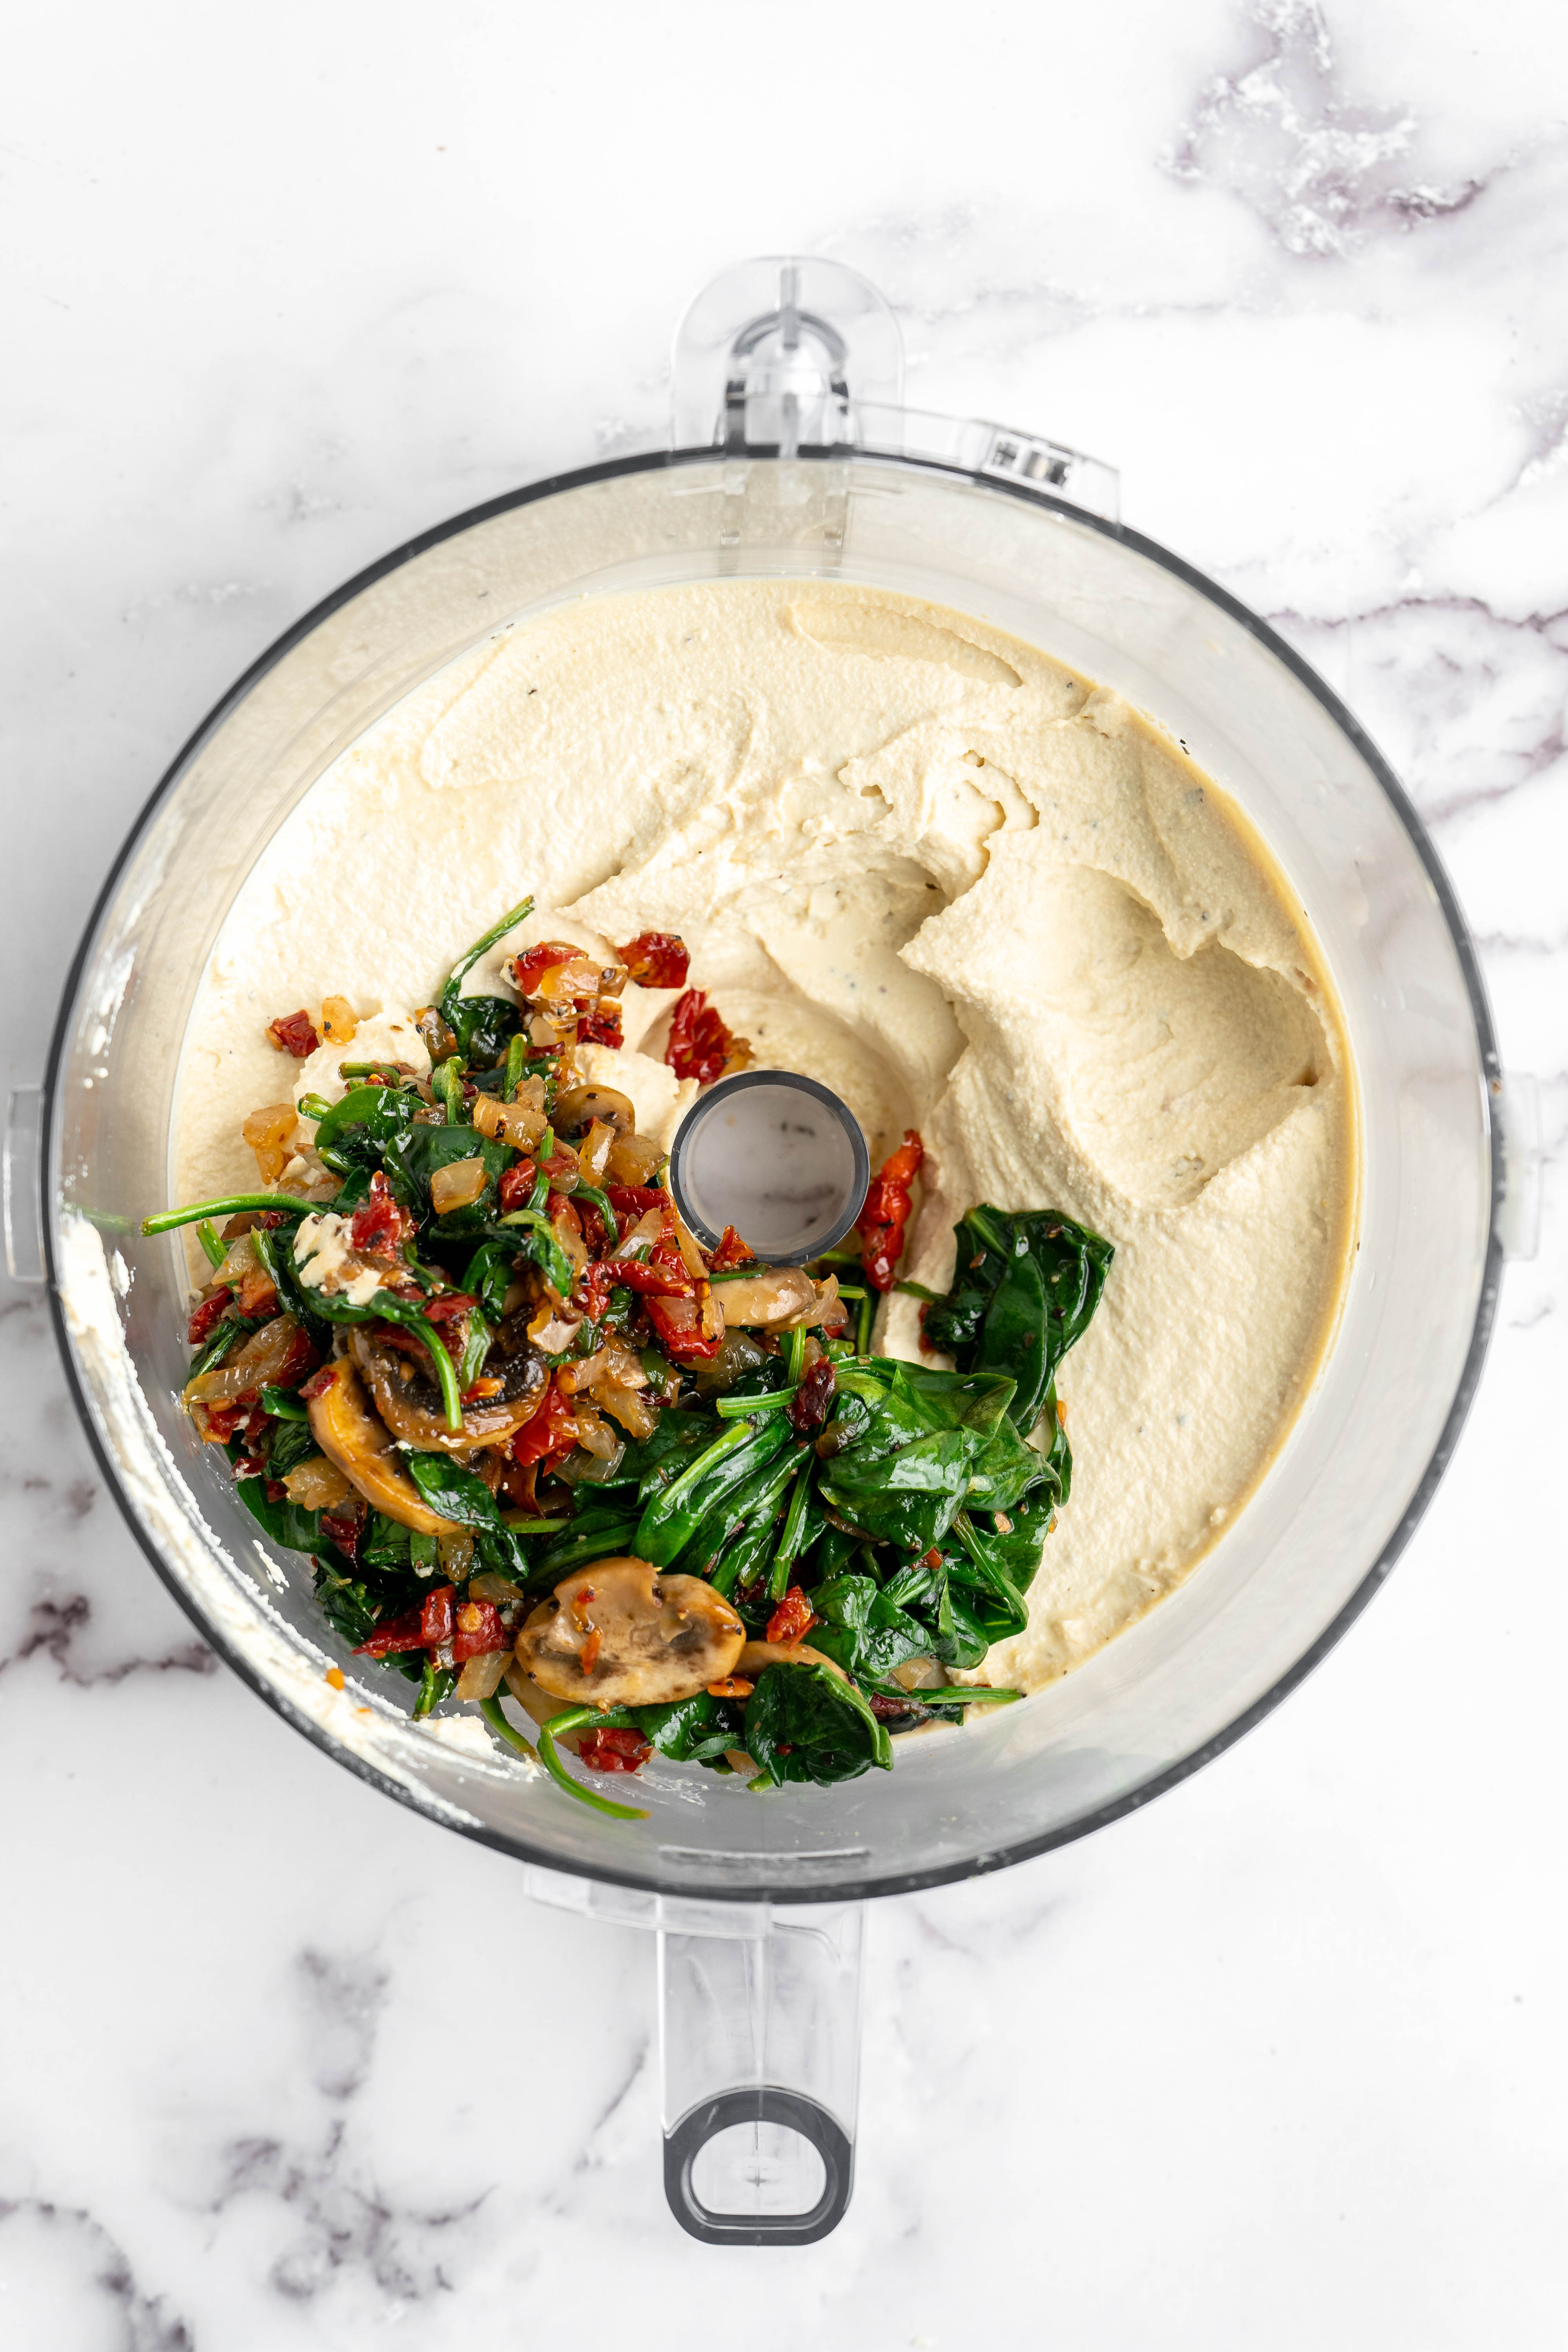 Vegetables added to vegan quiche filling in food processor bowl